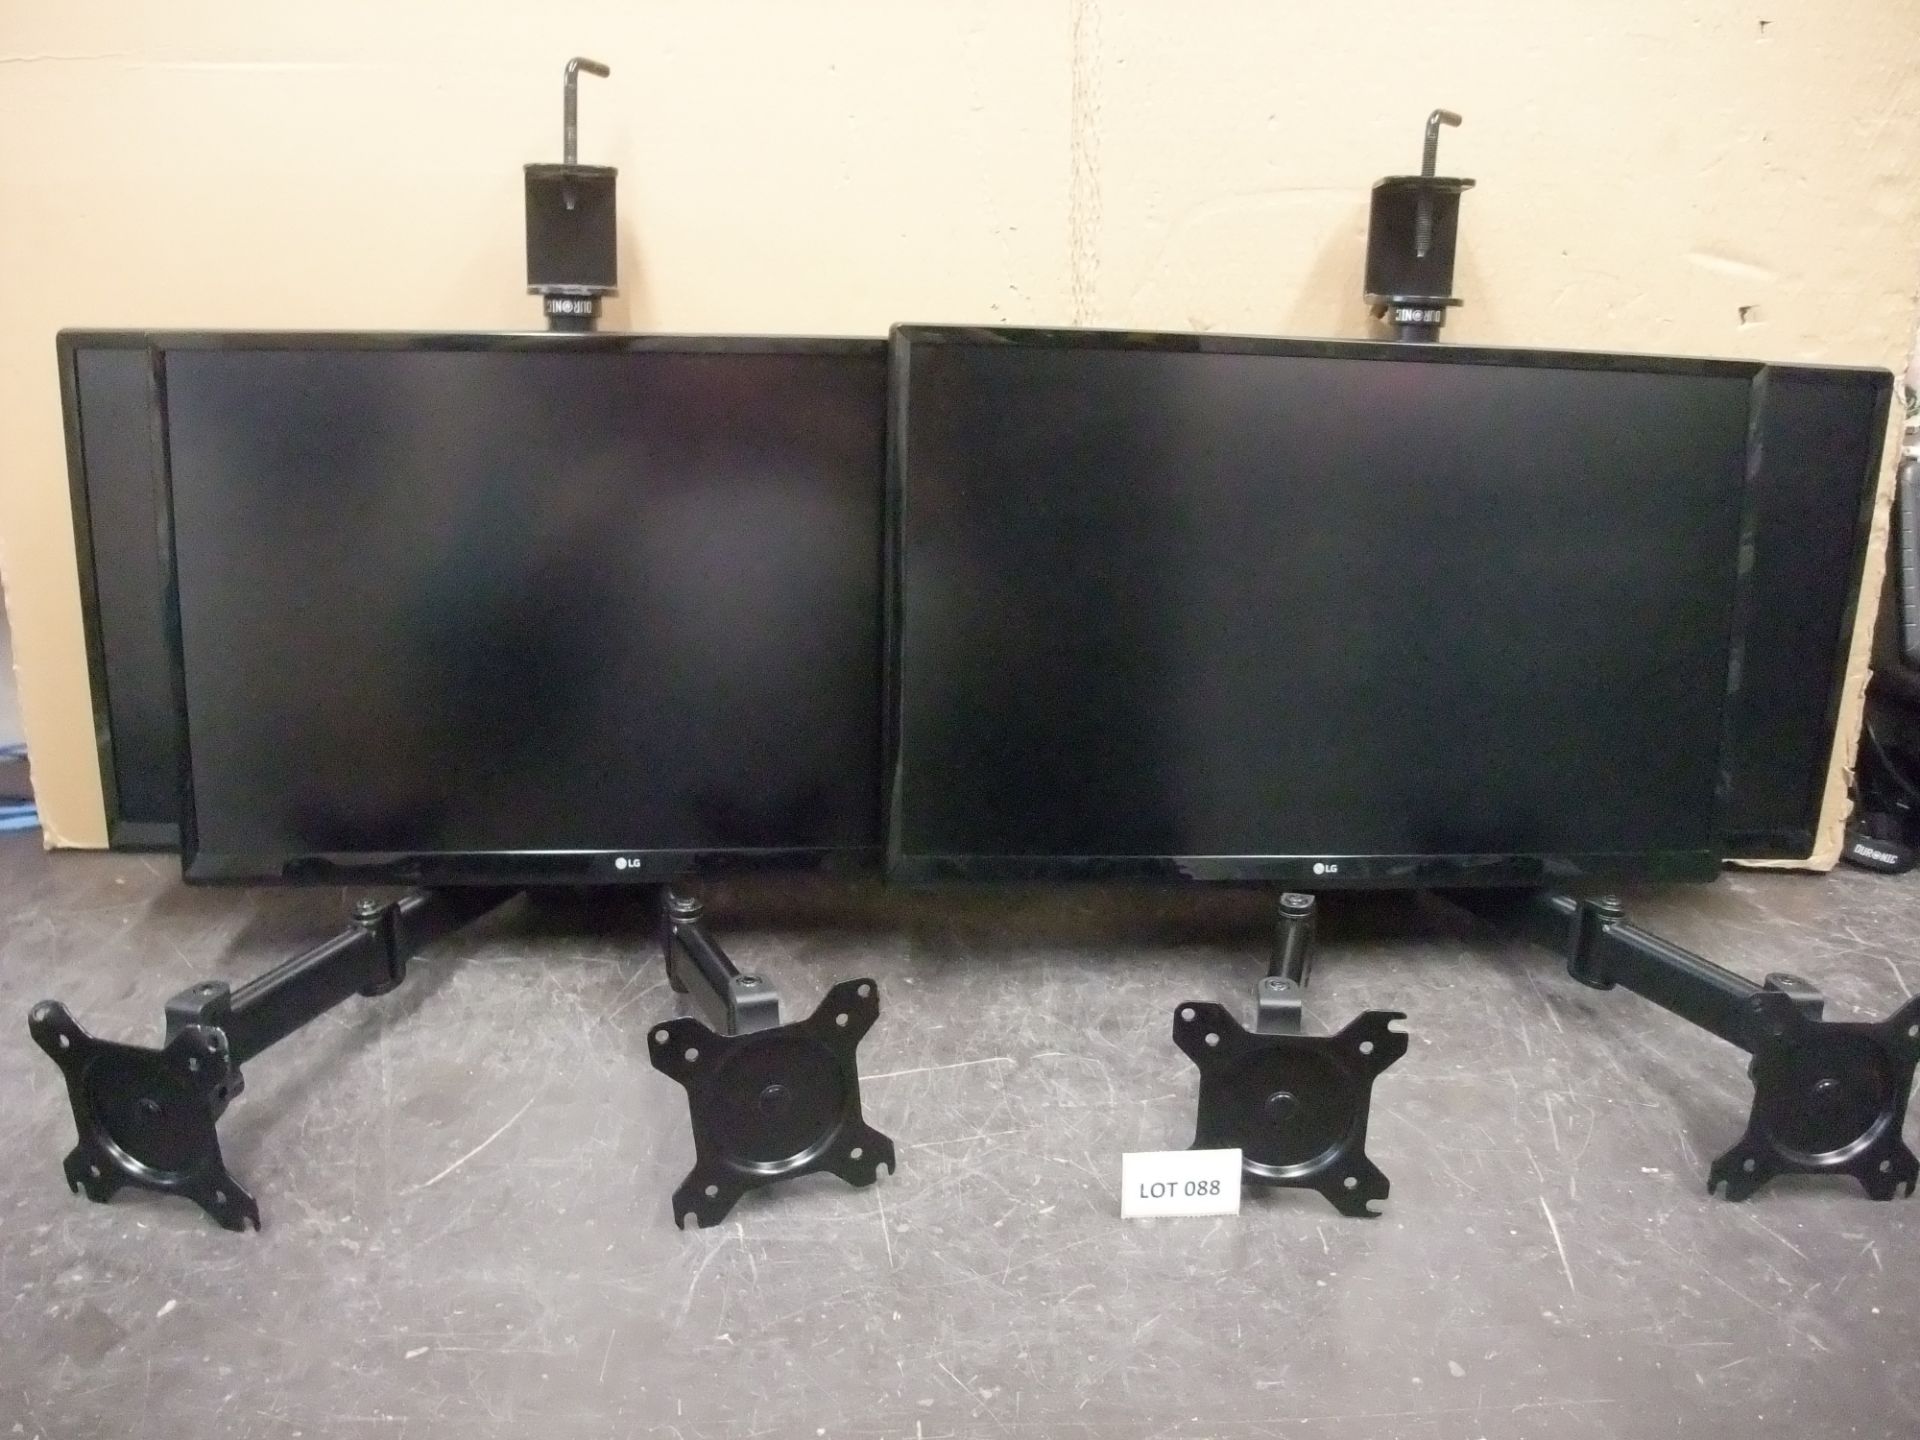 Four LG 24UD58-B 24in. Monitors, with two twin deskmount monitor armsPlease read the following